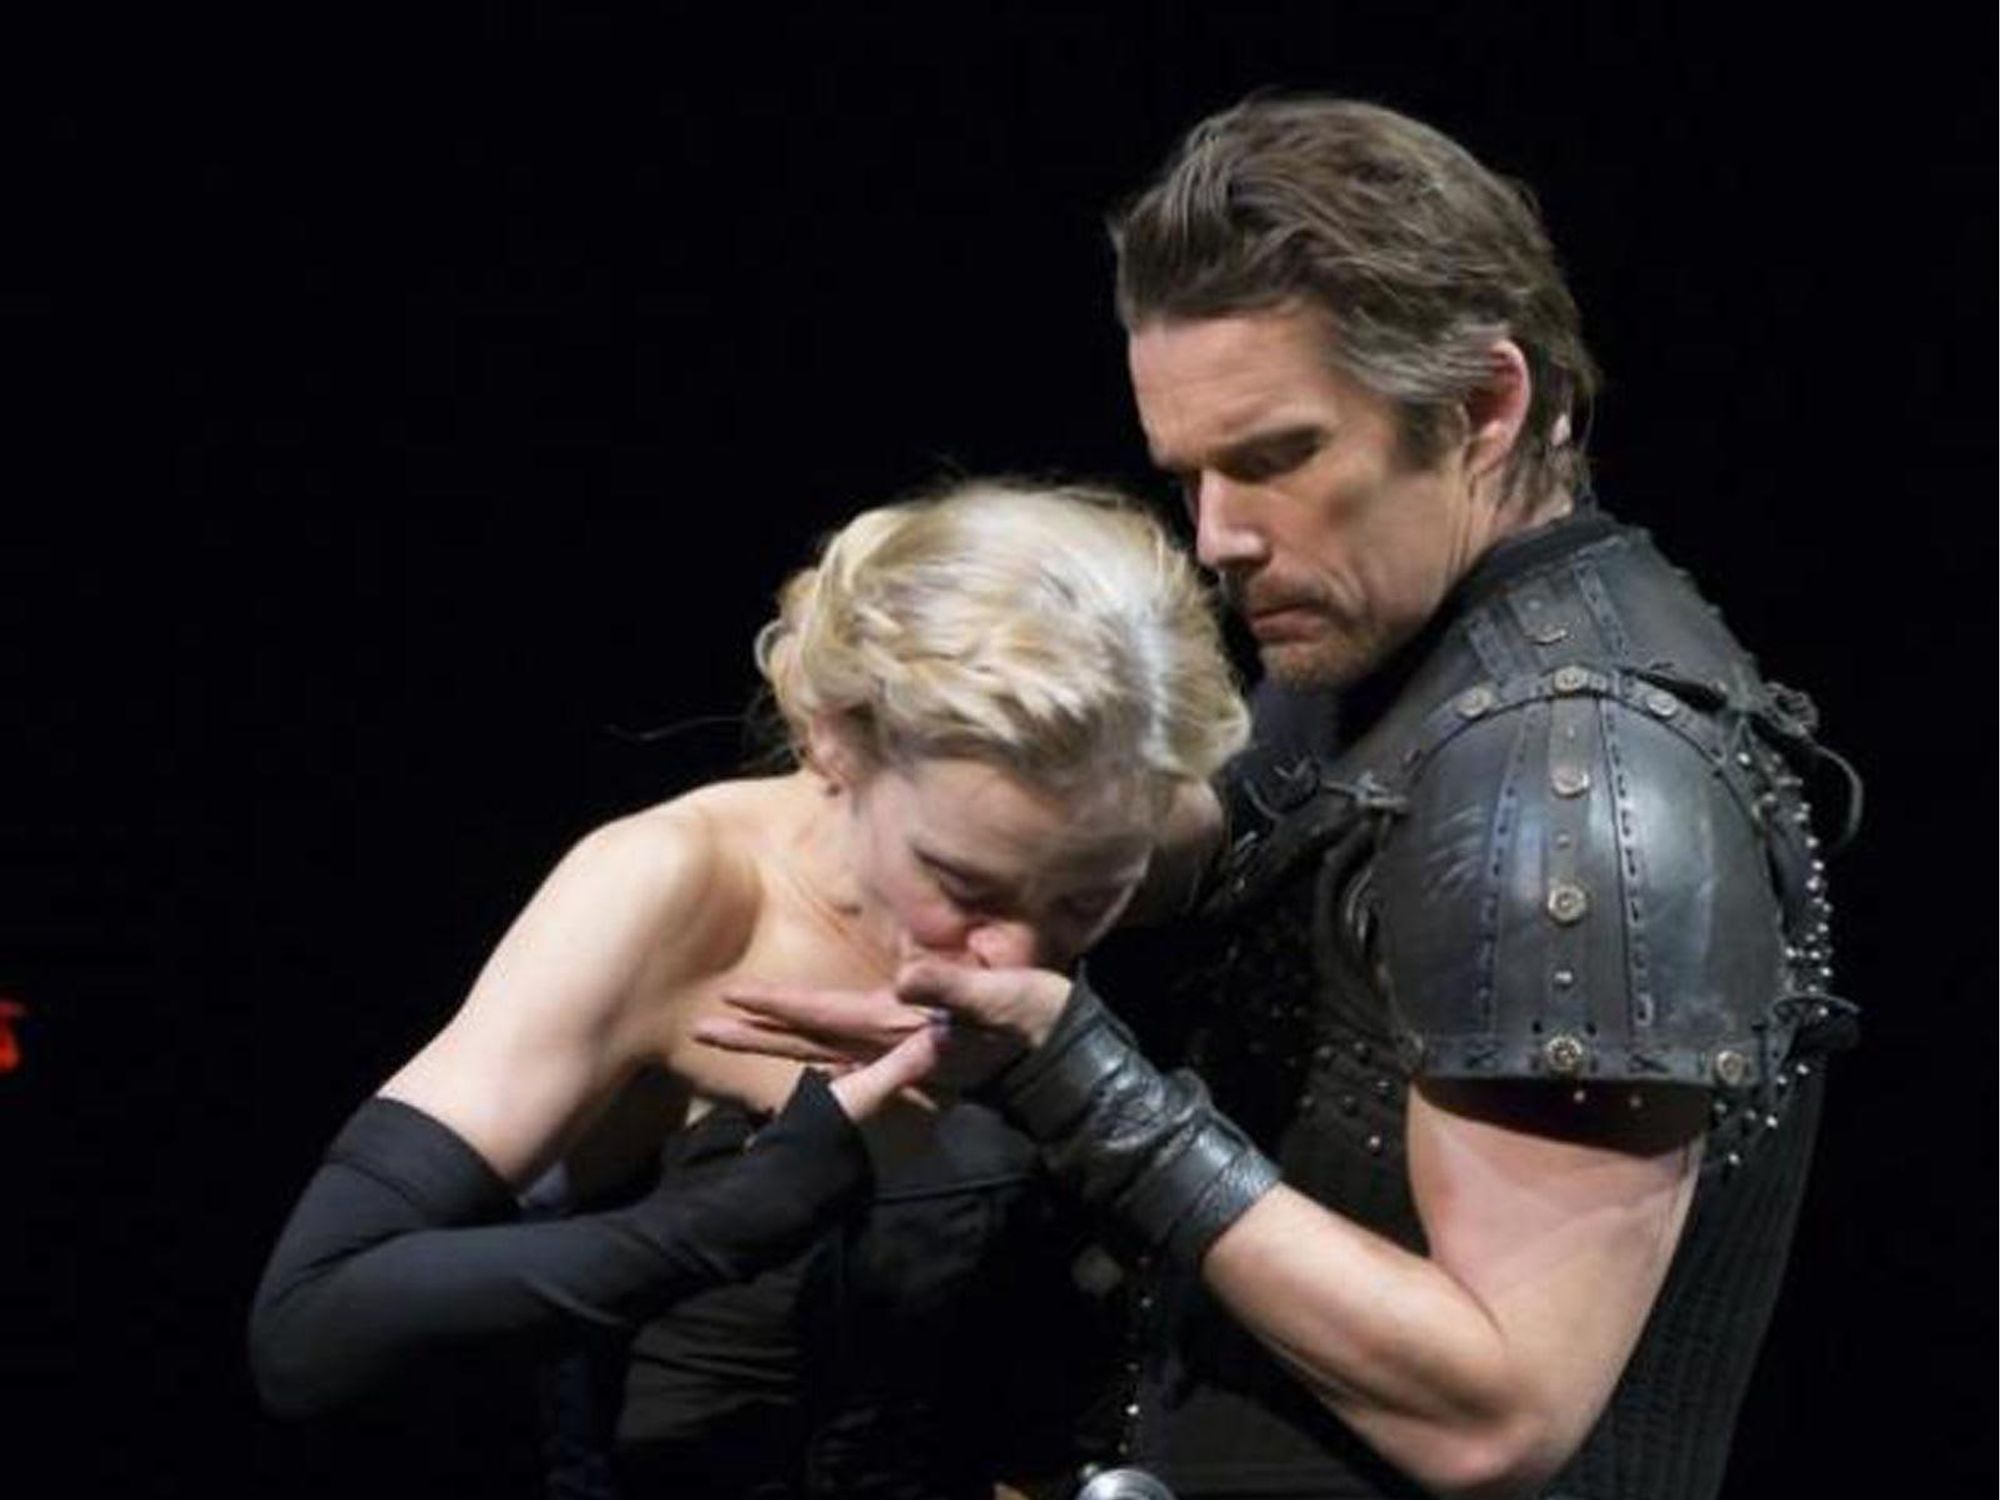 Macbeth on Broadway with Ethan Hawke and witch